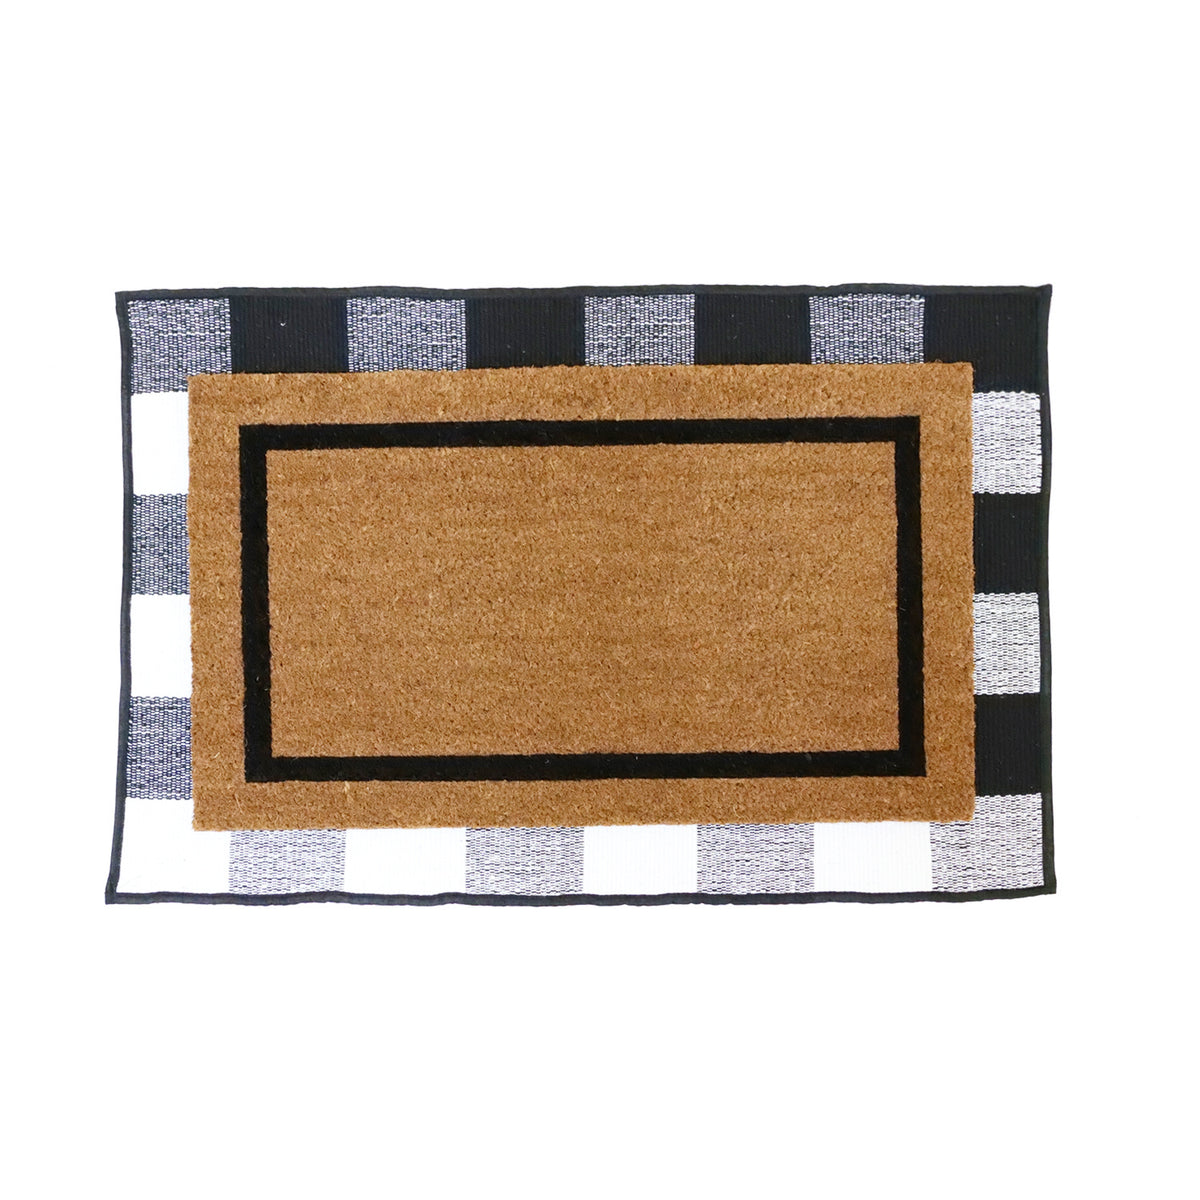 OnlyMat COMBO: Personalized Doormat with Large Initials and Underlay Cotton Rug - Design 3